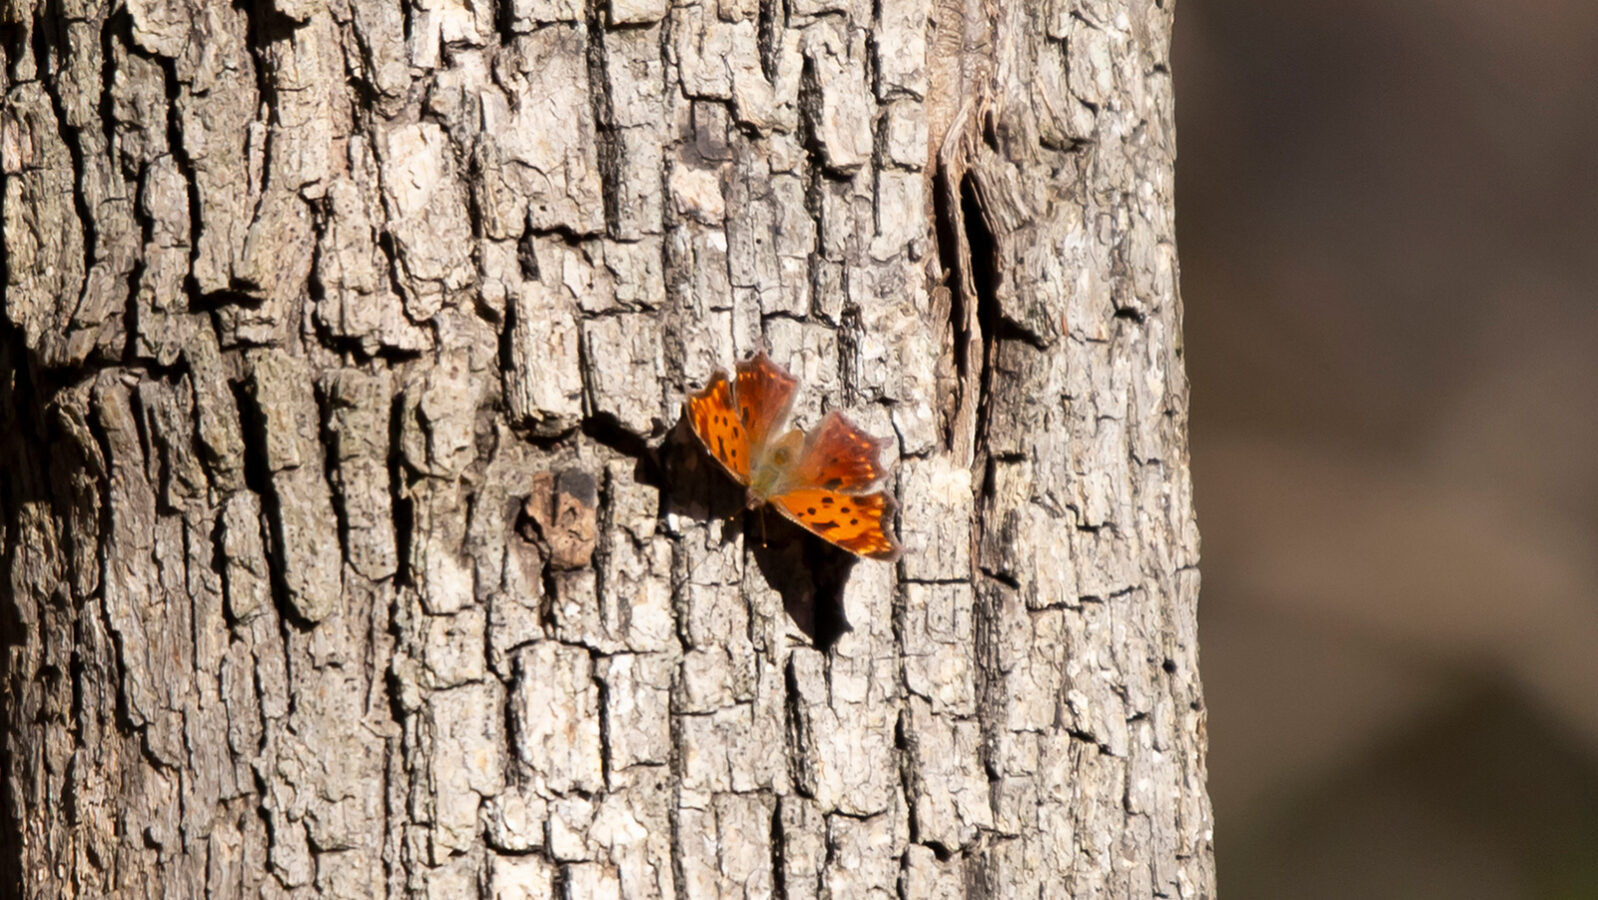 Eastern comma butterfly foraging for sap on a tree trunk